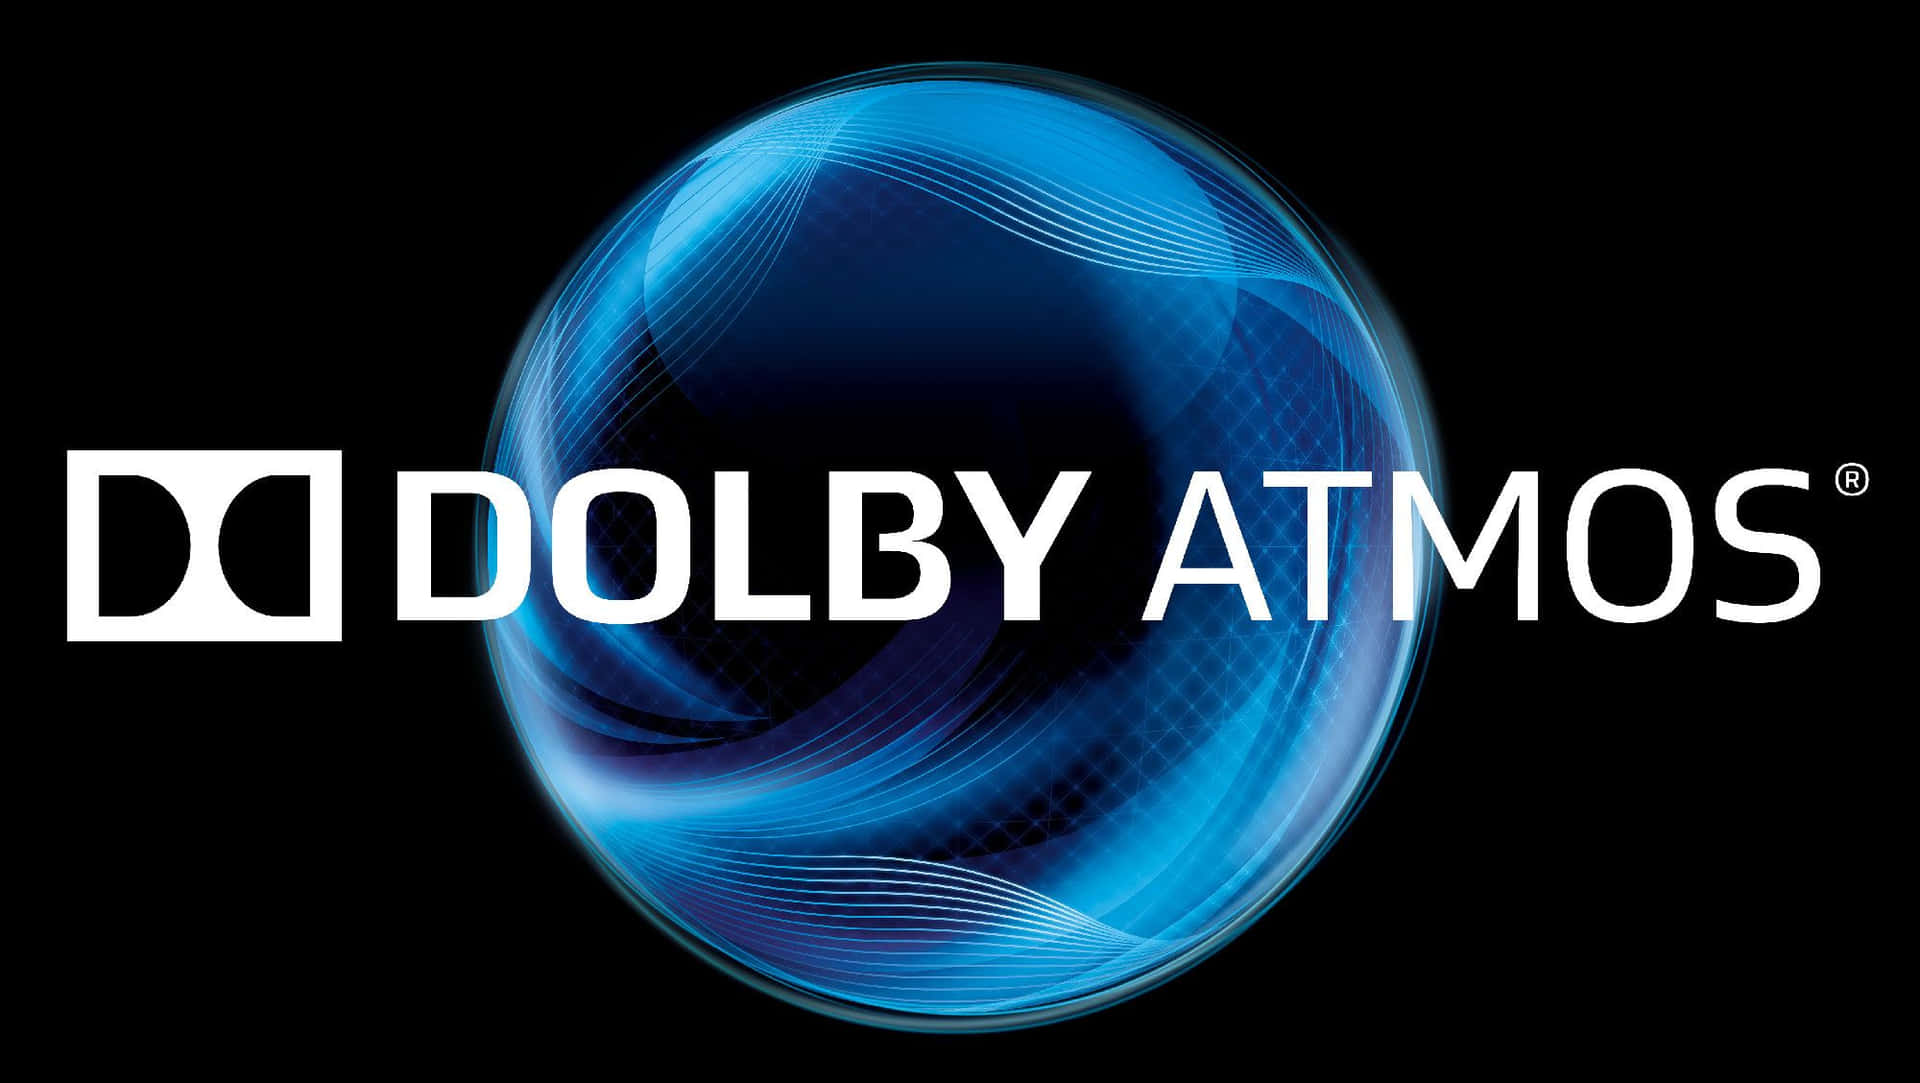 Dolby Atmos provides an exceptional, immersive sound experience Wallpaper